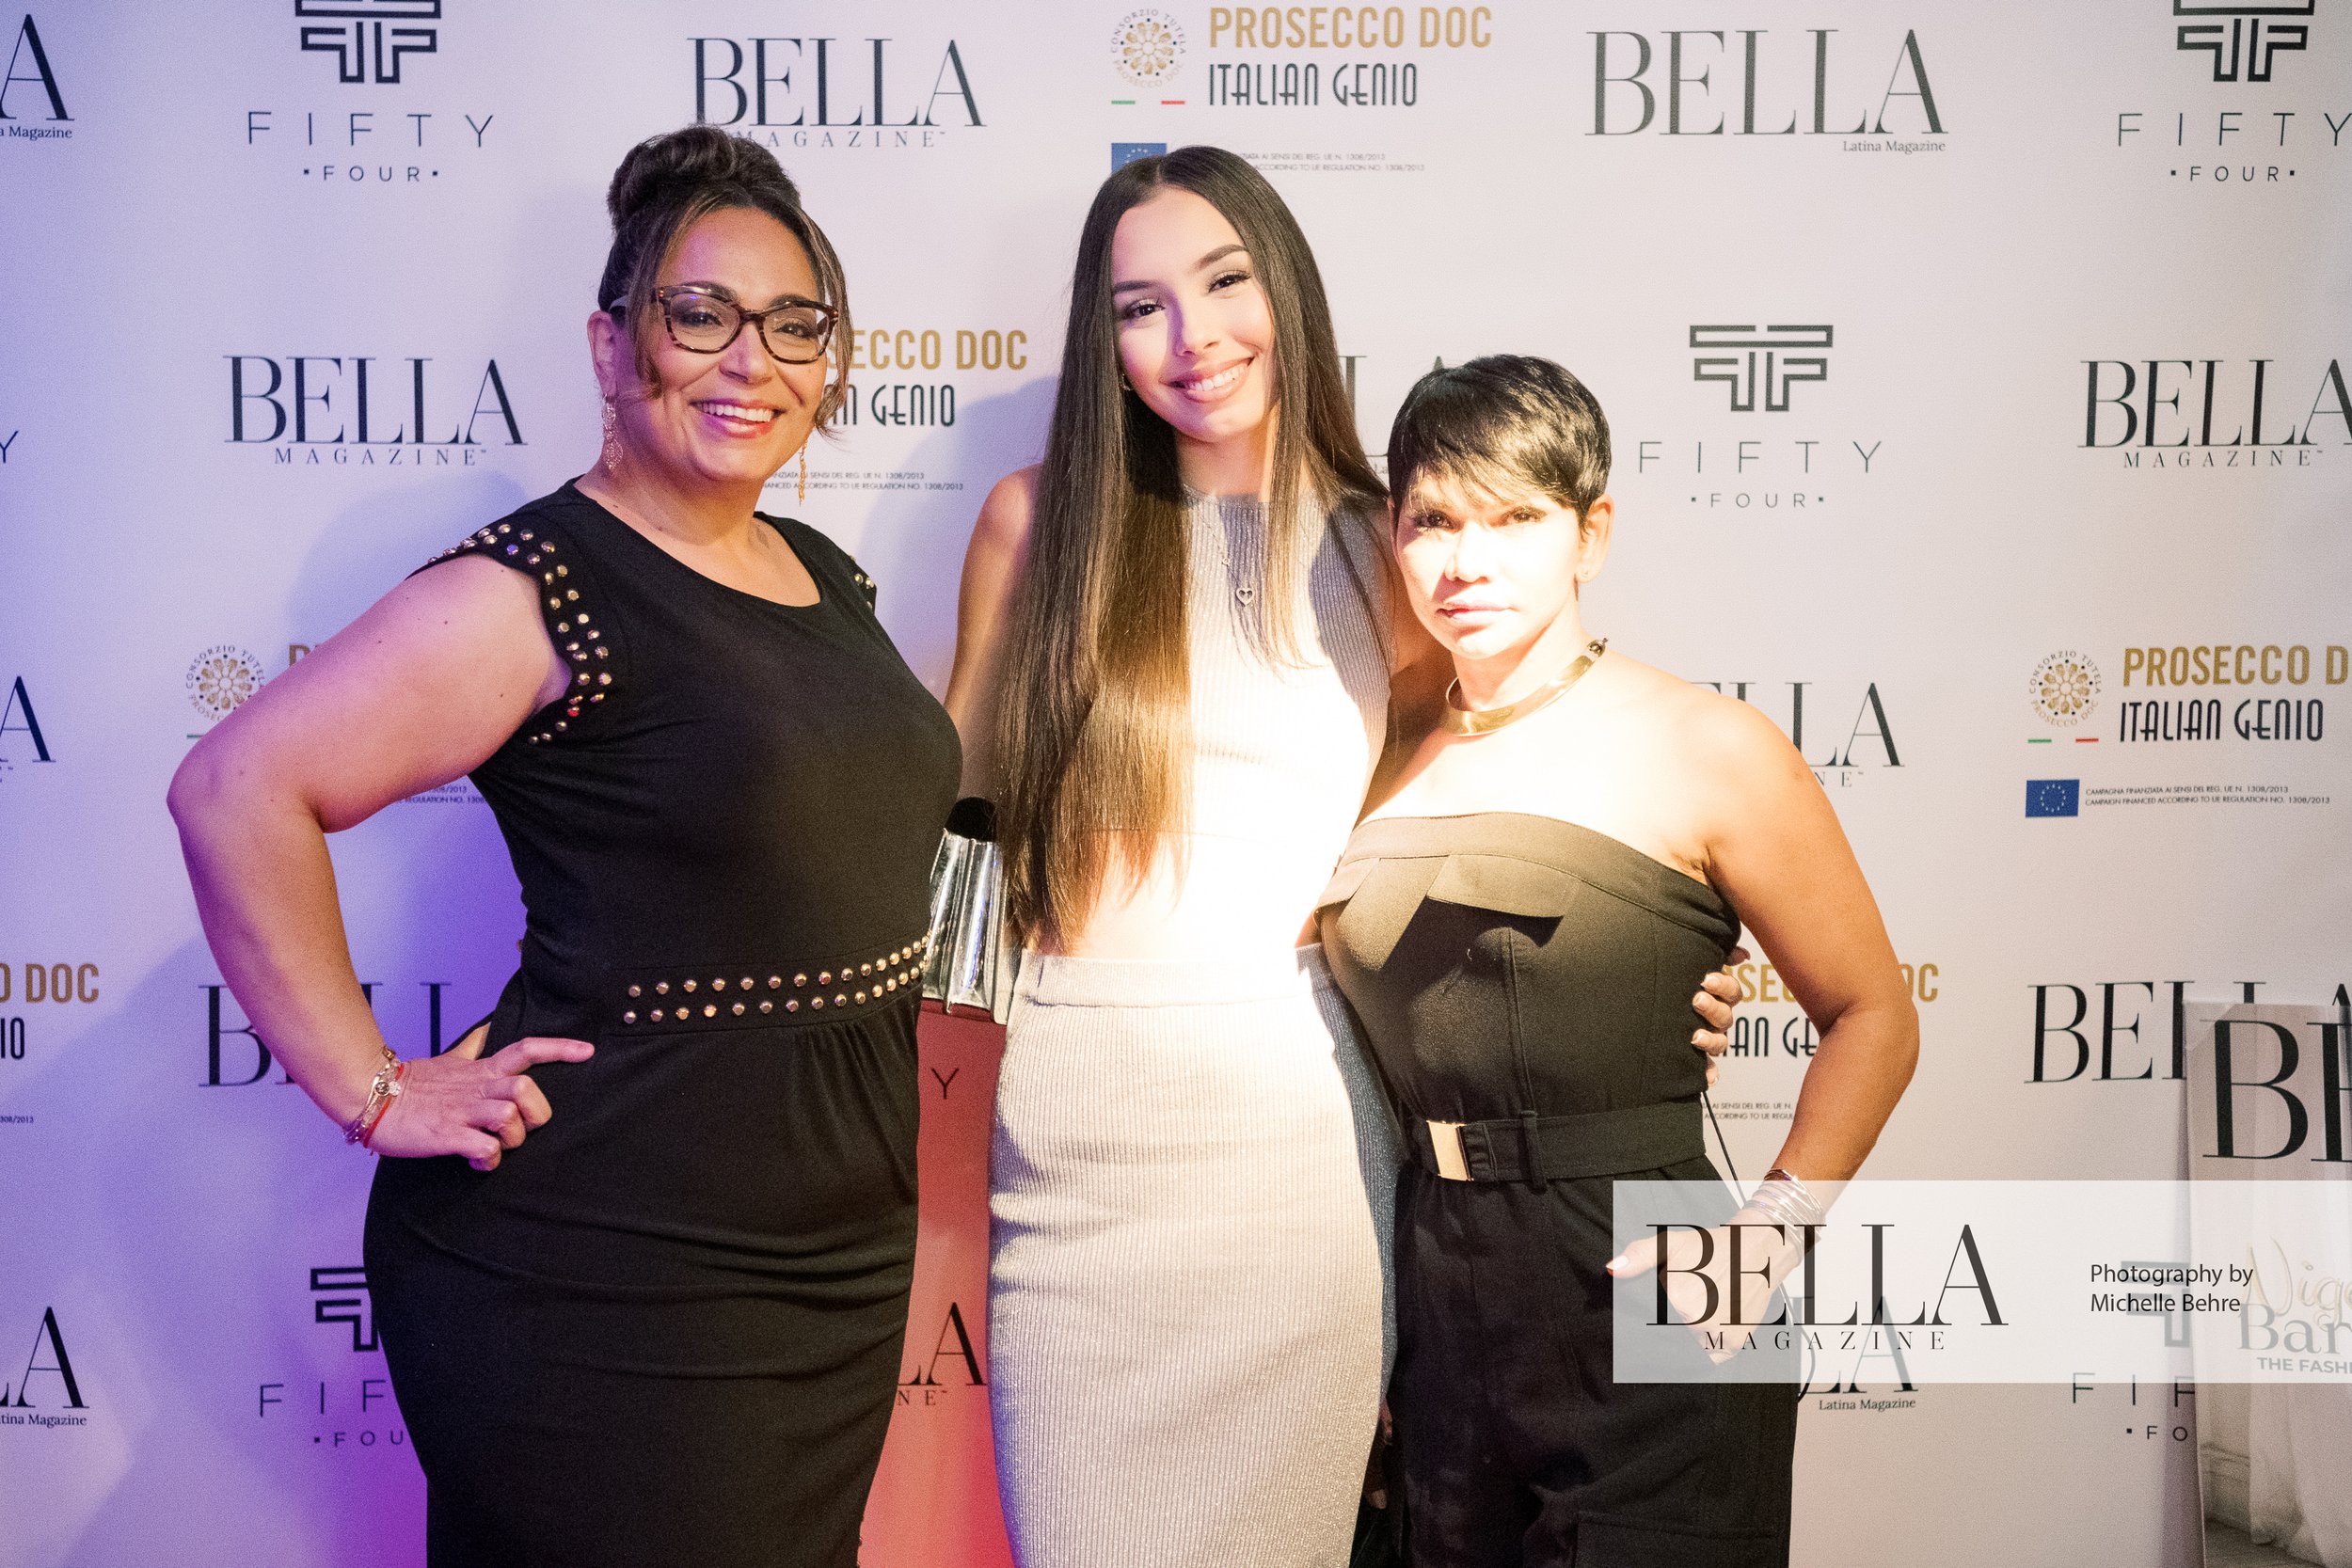 BELLA-Magazine-September-Issue-Cover-Event-Fifty-Four-103 2.jpg